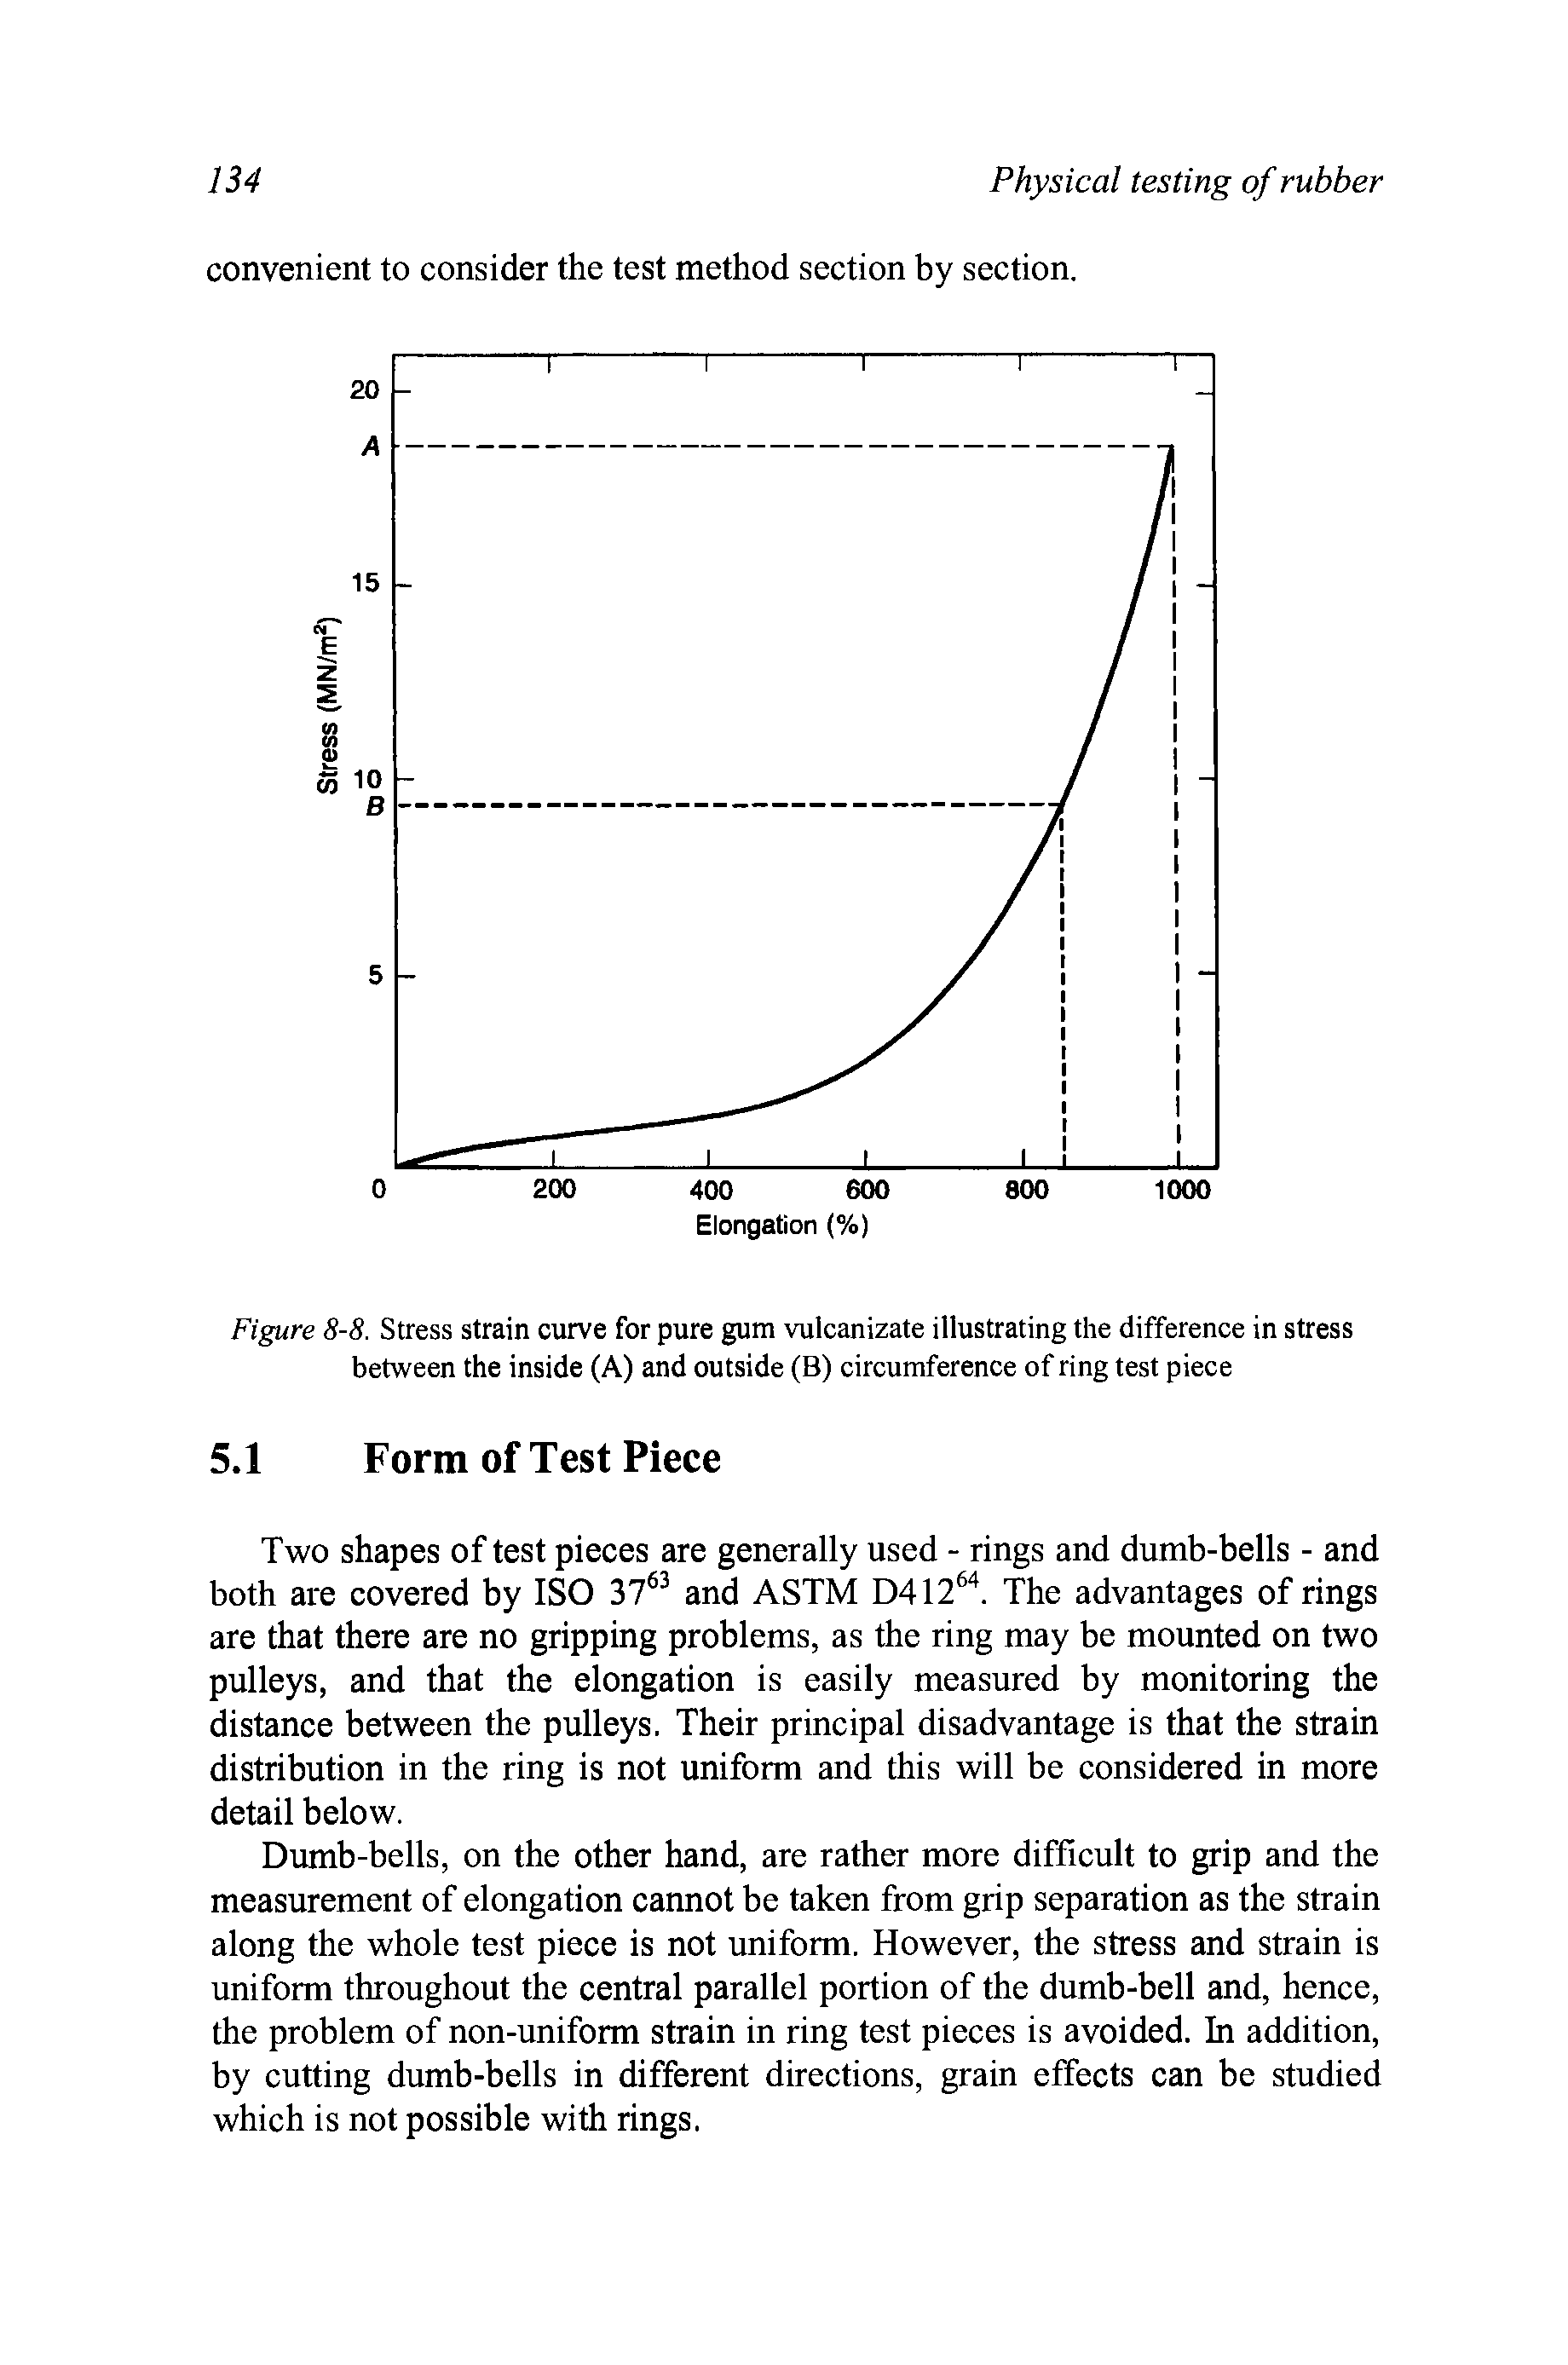 Figure 8-8. Stress strain curve for pure gum vulcanizate illustrating the difference in stress between the inside (A) and outside (B) circumference of ring test piece...